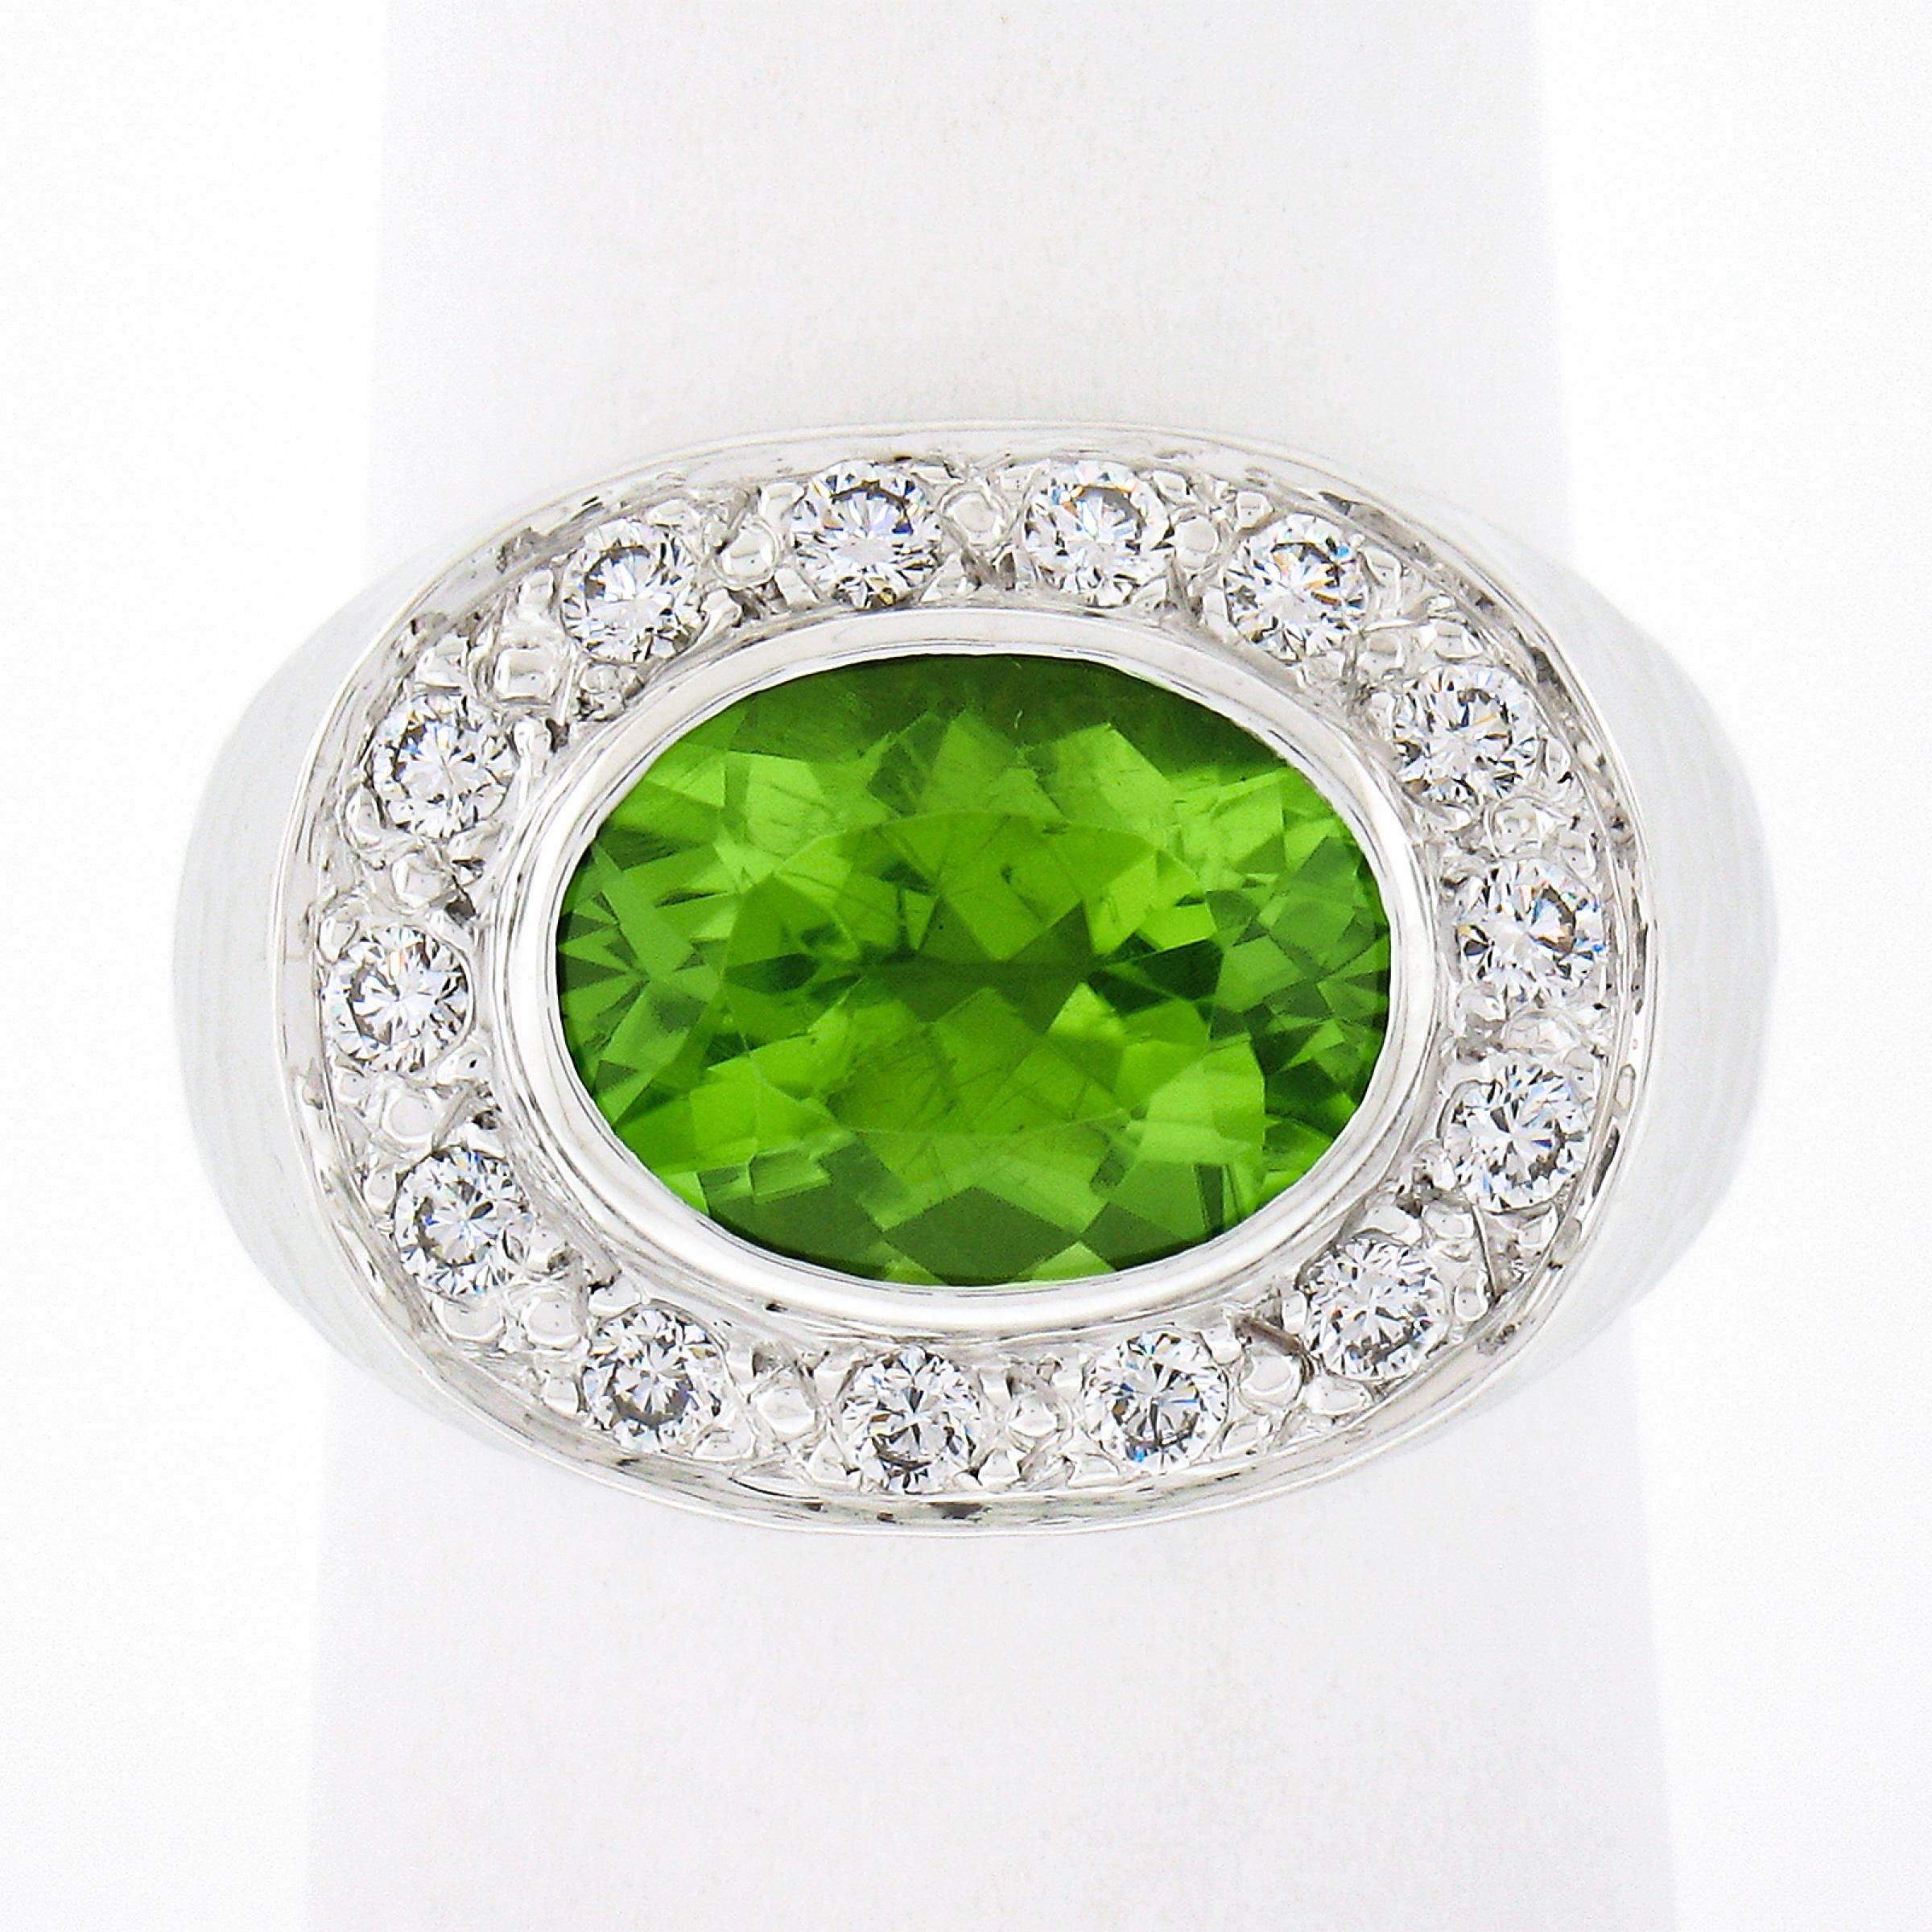 Here we have an absolutely magnificent cocktail ring that is crafted from solid 18k white gold featuring a large peridot gemstone that is perfectly accented with very fine quality diamonds. The oval brilliant cut peridot weighs approximately 3.62